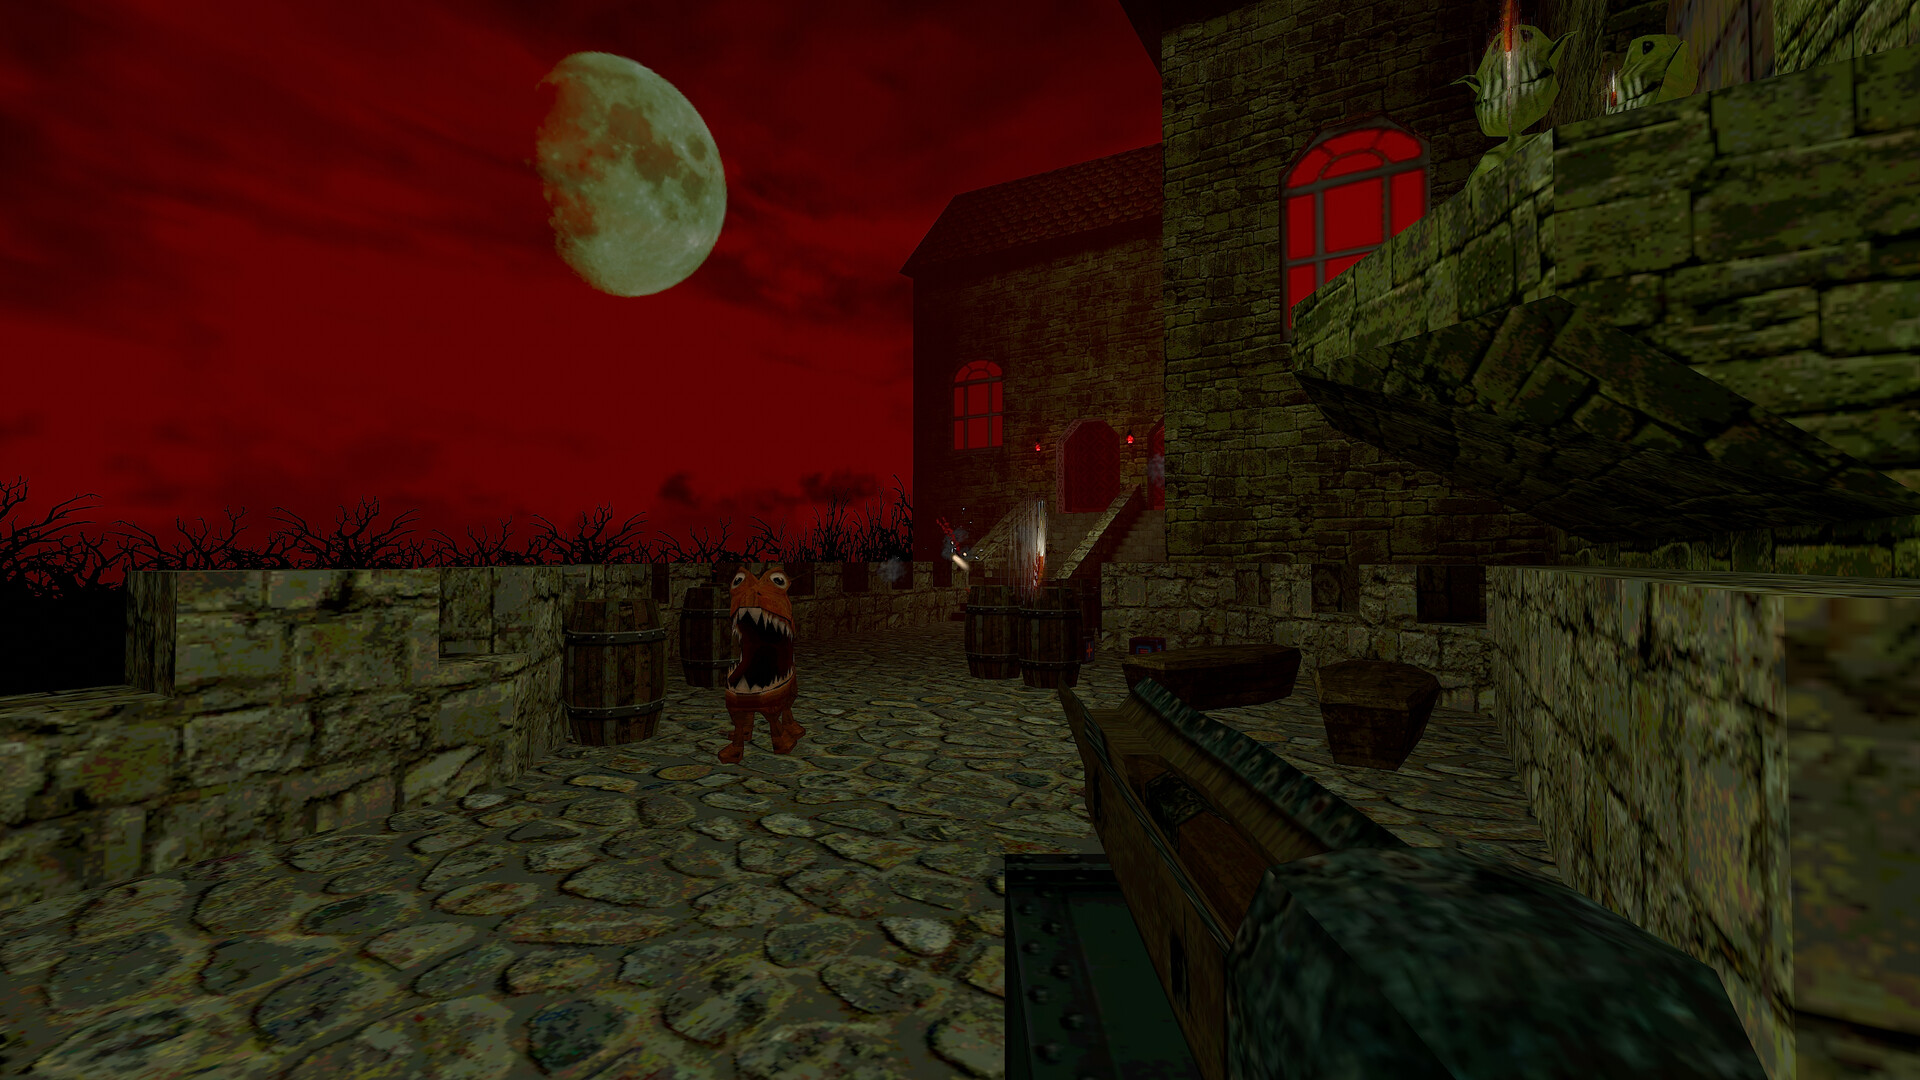 Dusk creator unveils ‘microshooter’ meant to be completed in a single sitting